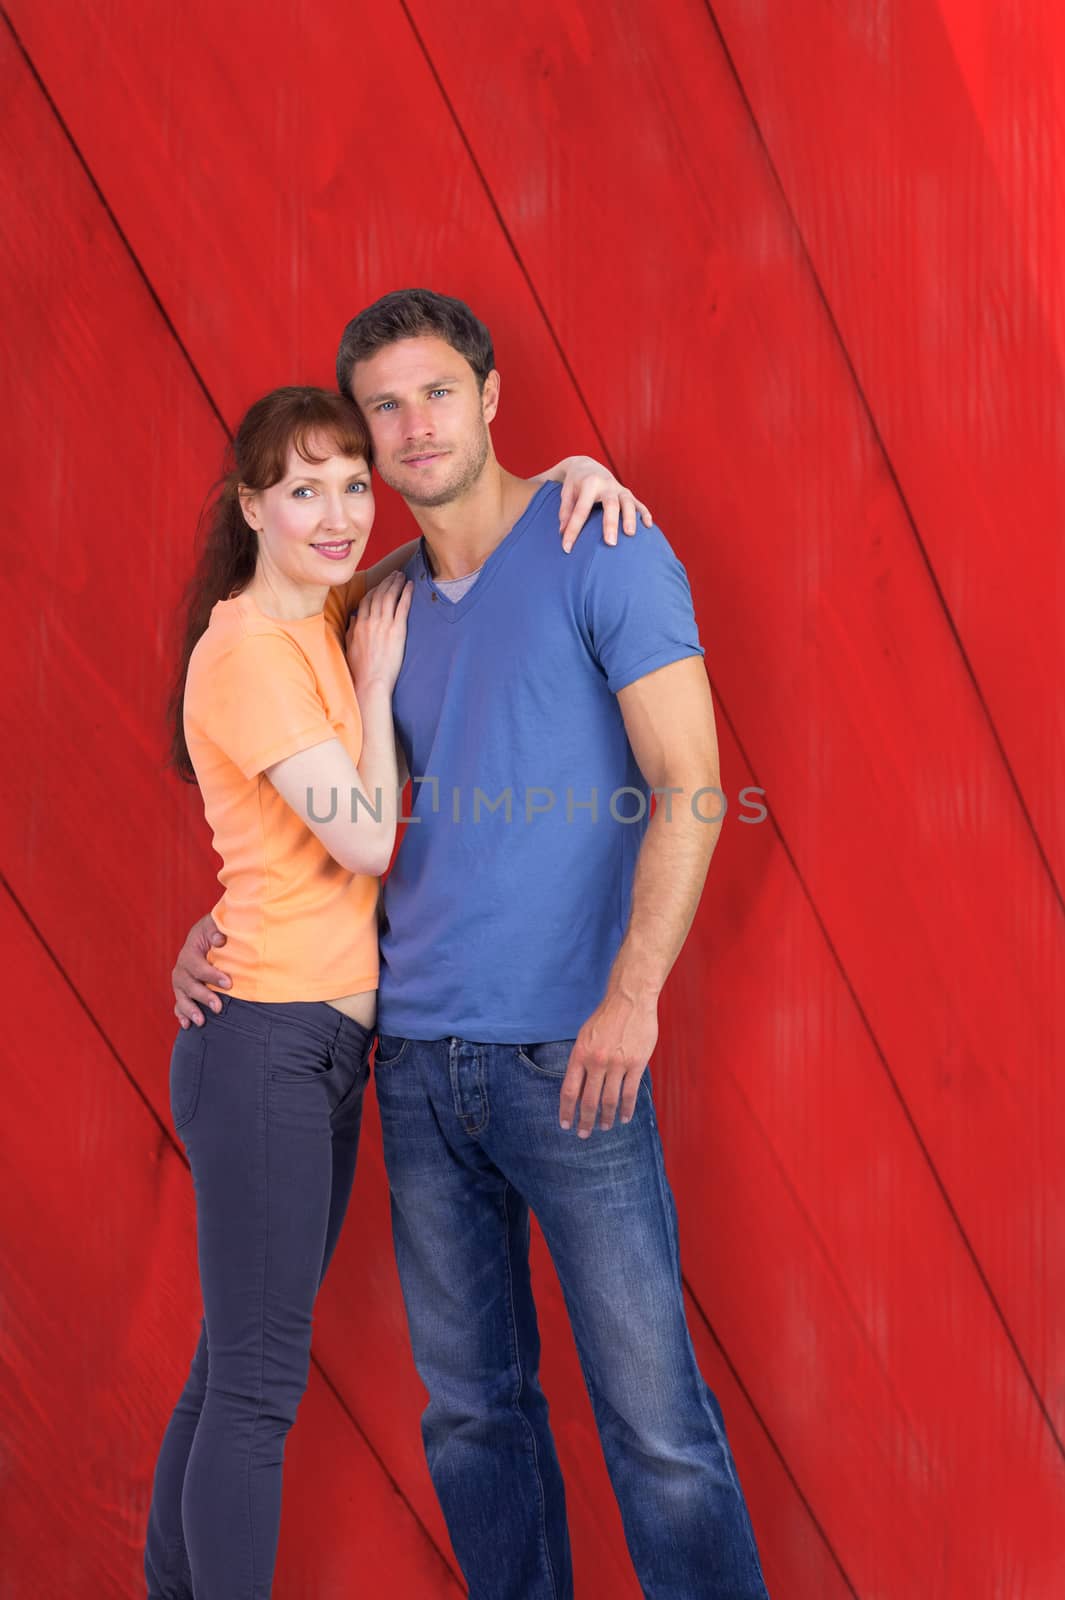 Couple looking at the camera against red wooden planks